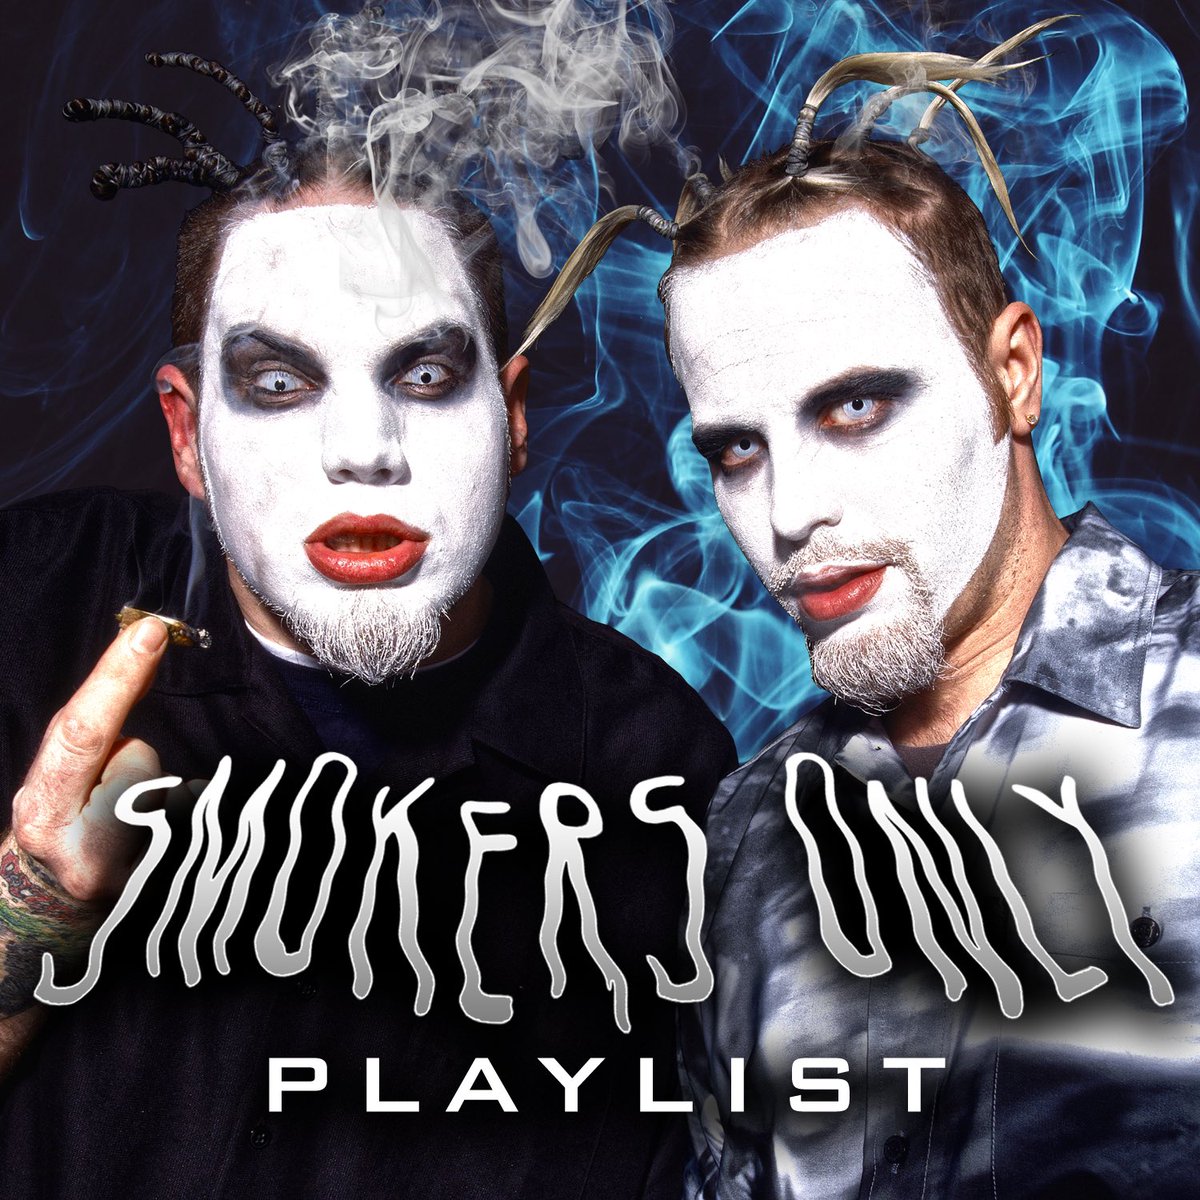 .@tweetmesohard ‘s “Smokers Only” playlist is live on @Spotify right now, just in time for 4/20 ⤵️ open.spotify.com/playlist/0u7B3… What’s your favorite Twiztid smoke track? 💨